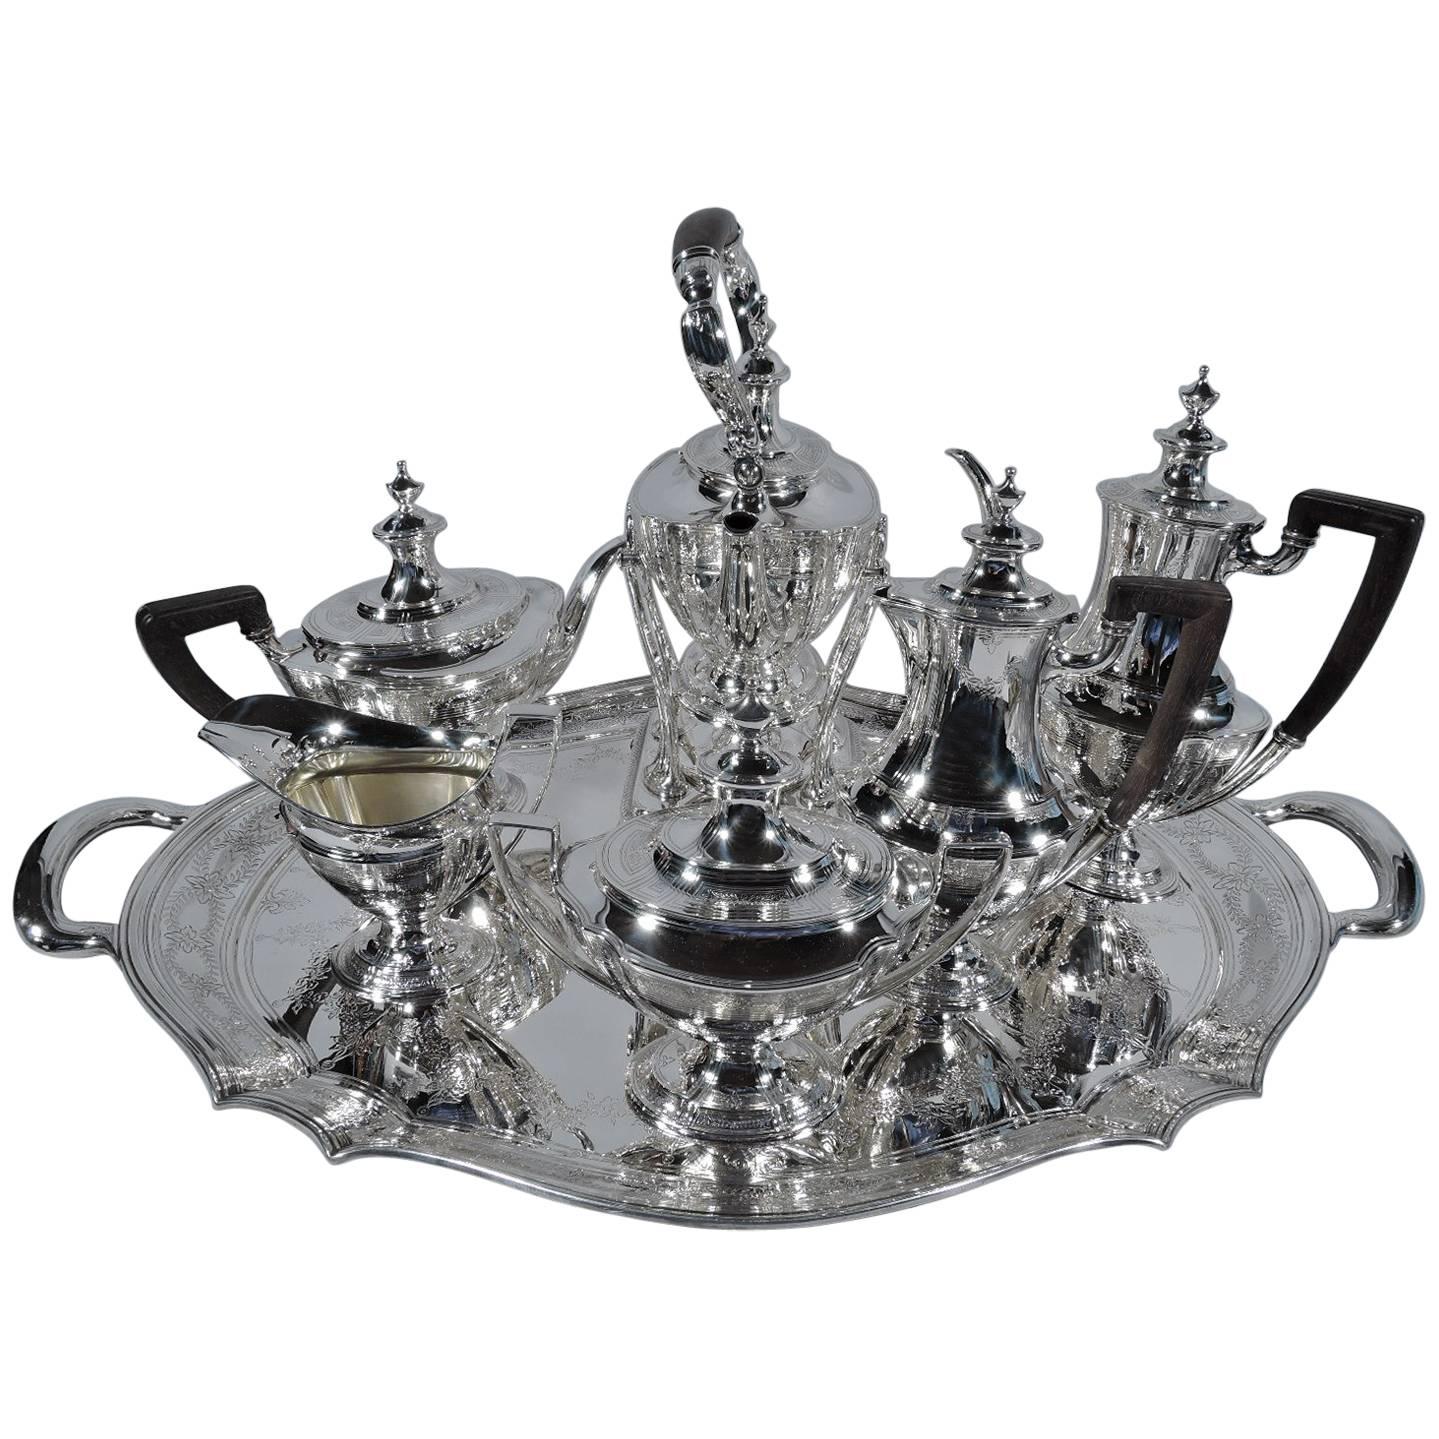 Tiffany Edwardian Sterling Silver Tea and Coffee Set on Tray